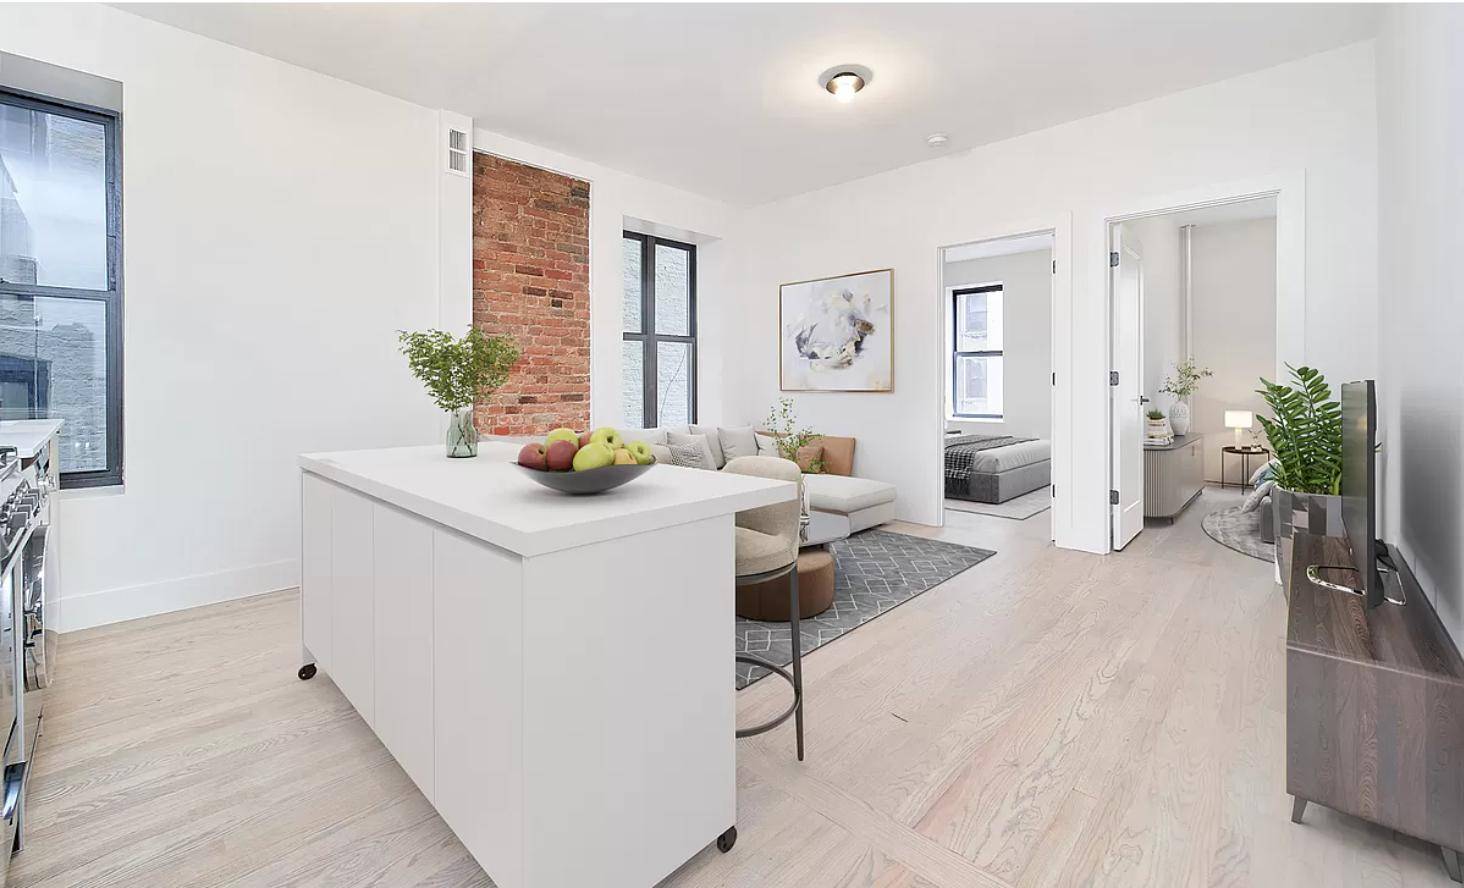 302 304 East 5th Street is a luxury walkup building located in the heart of The East VillageApartments Features 2 Bedroom Brand new renovation Washer Dryer Dishwasher Hardwood Floors Marble ...